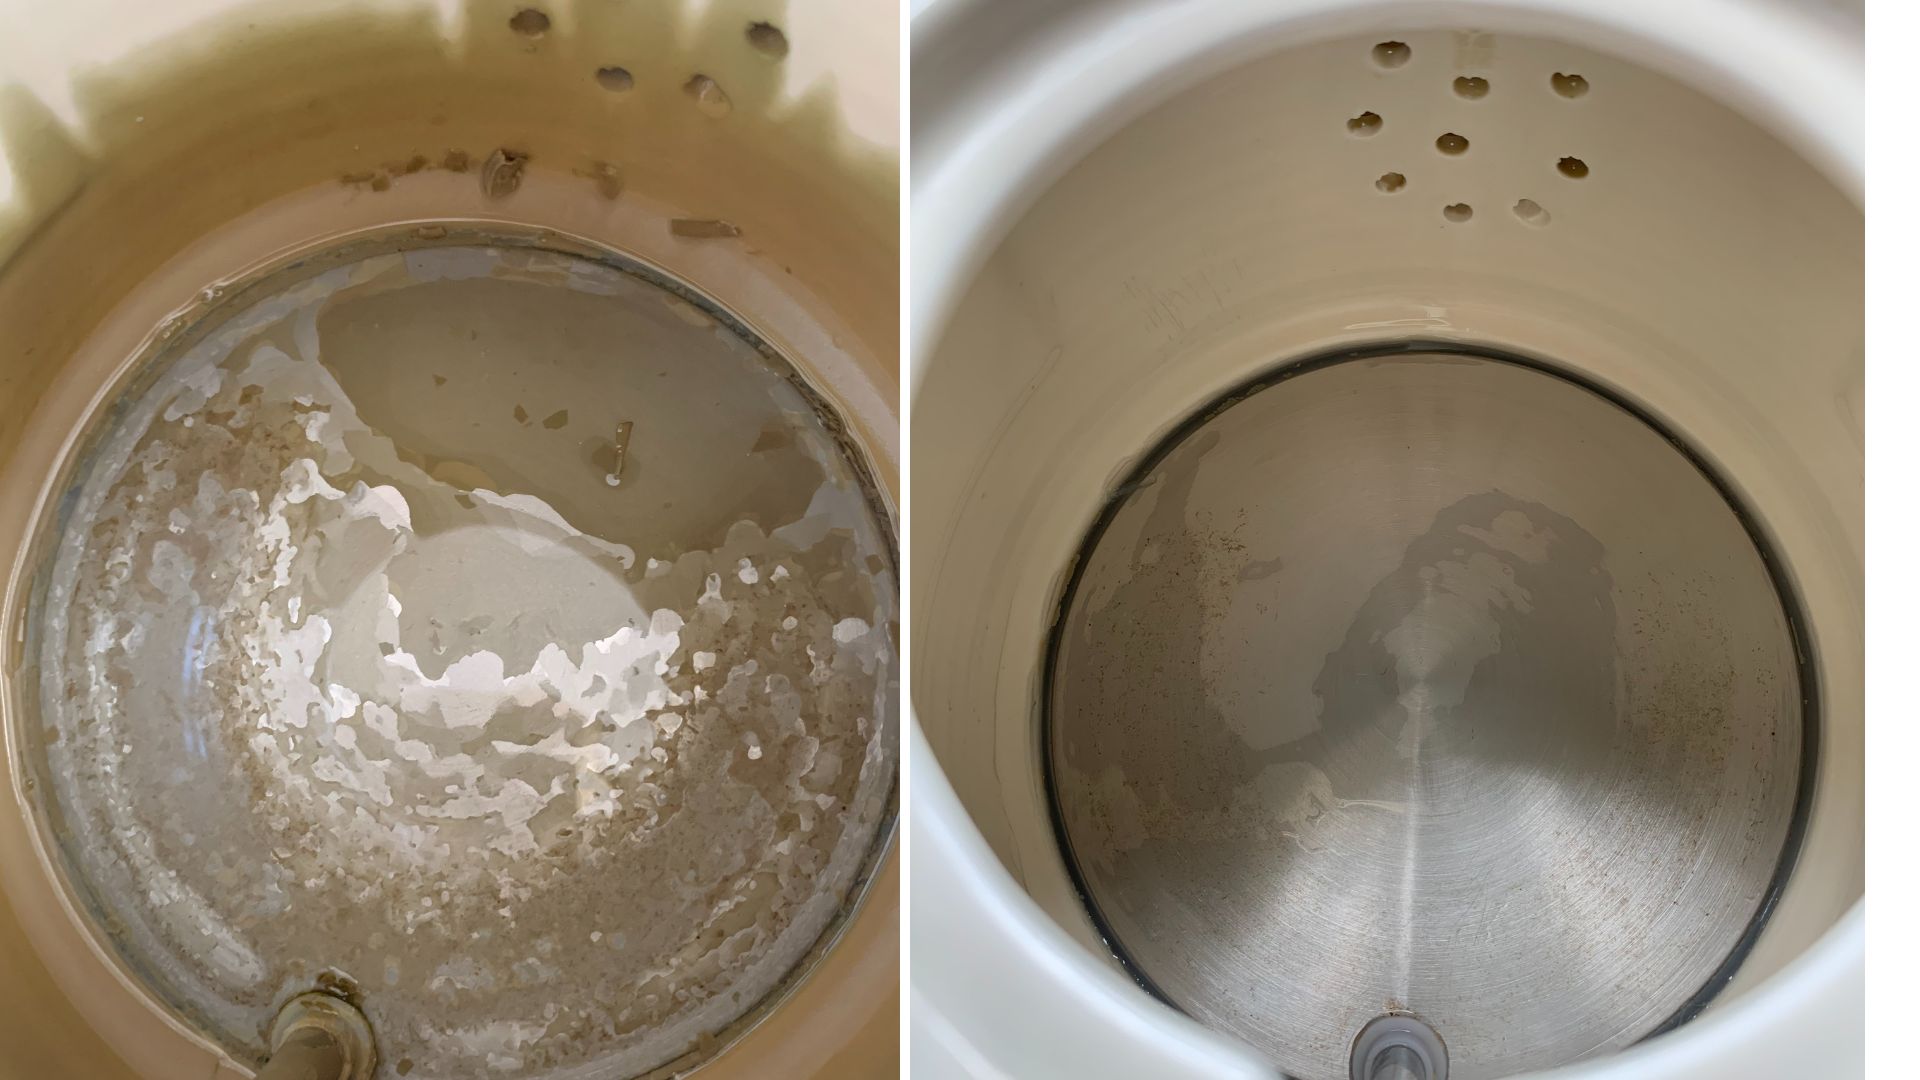 Descaling a kettle before and after showing how limescale is removed